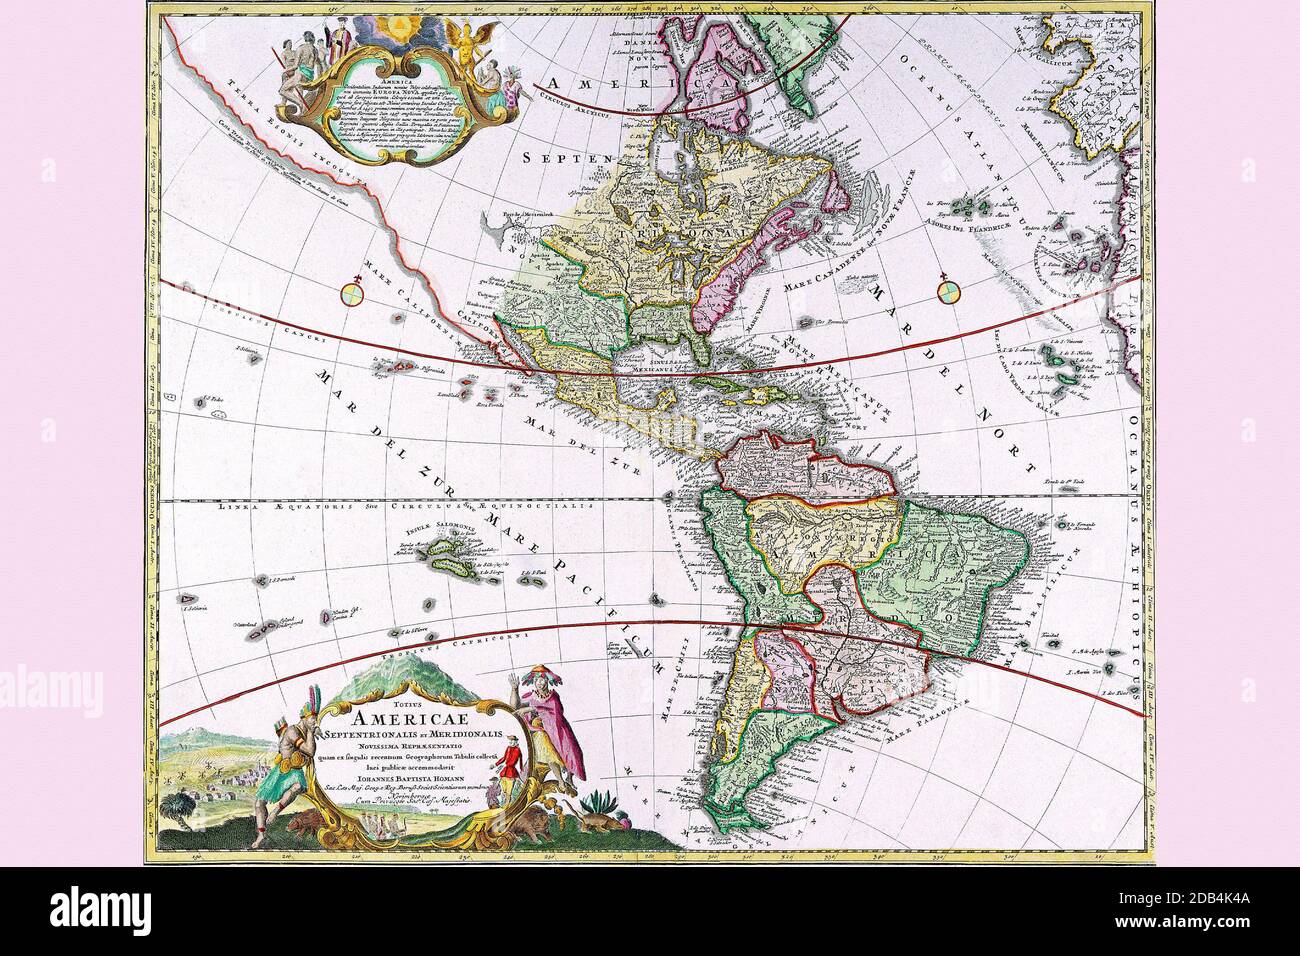 'Johann Baptist Homann (20 March 1664 ? 1 July 1724) was a German geographer and cartographer, who made maps of the Americas . Homann was born in Oberkammlach near Kammlach, which is now in Bavaria. Although educated at a Jesuit school, he eventually converted to Protestantism. In 1715 Homann was appointed Imperial Geographer of the Holy Roman Empire. Giving such privileges to individuals was an added right that the Holy Roman Emperor enjoyed. In the same year he was also named a member of the Prussian Academy of Sciences. Of particular significance to cartography were the imperial printing pr Stock Photo